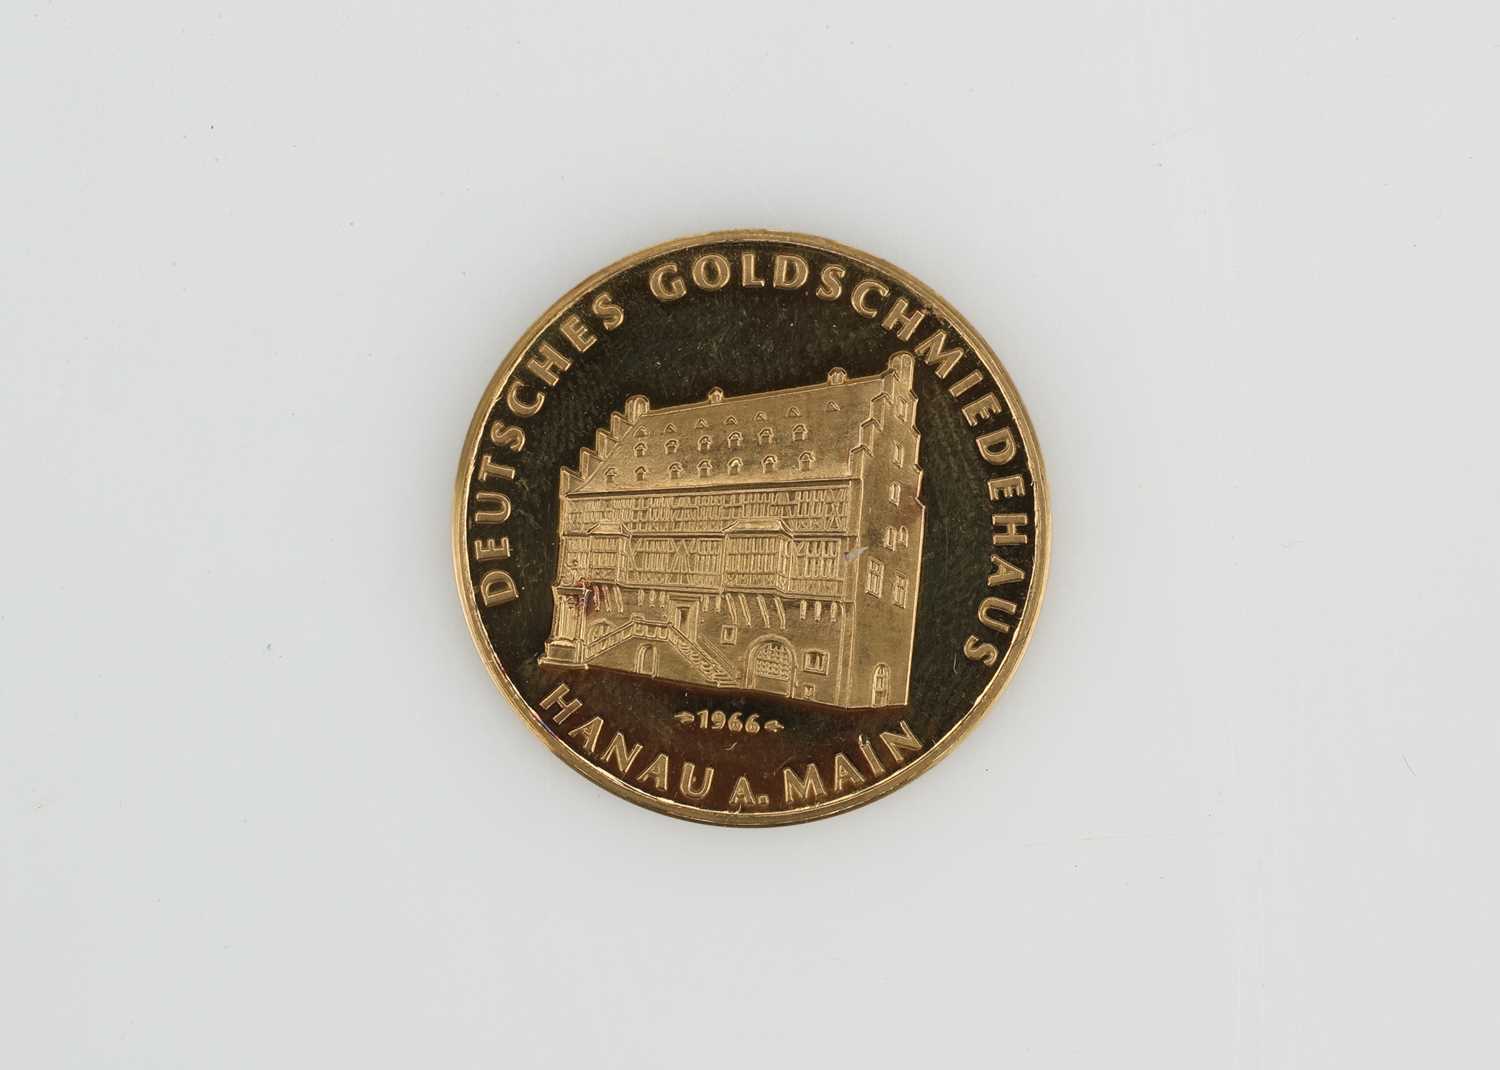 Lot 51 - German 1966 gold token from the Goldsmith's house in Hanau